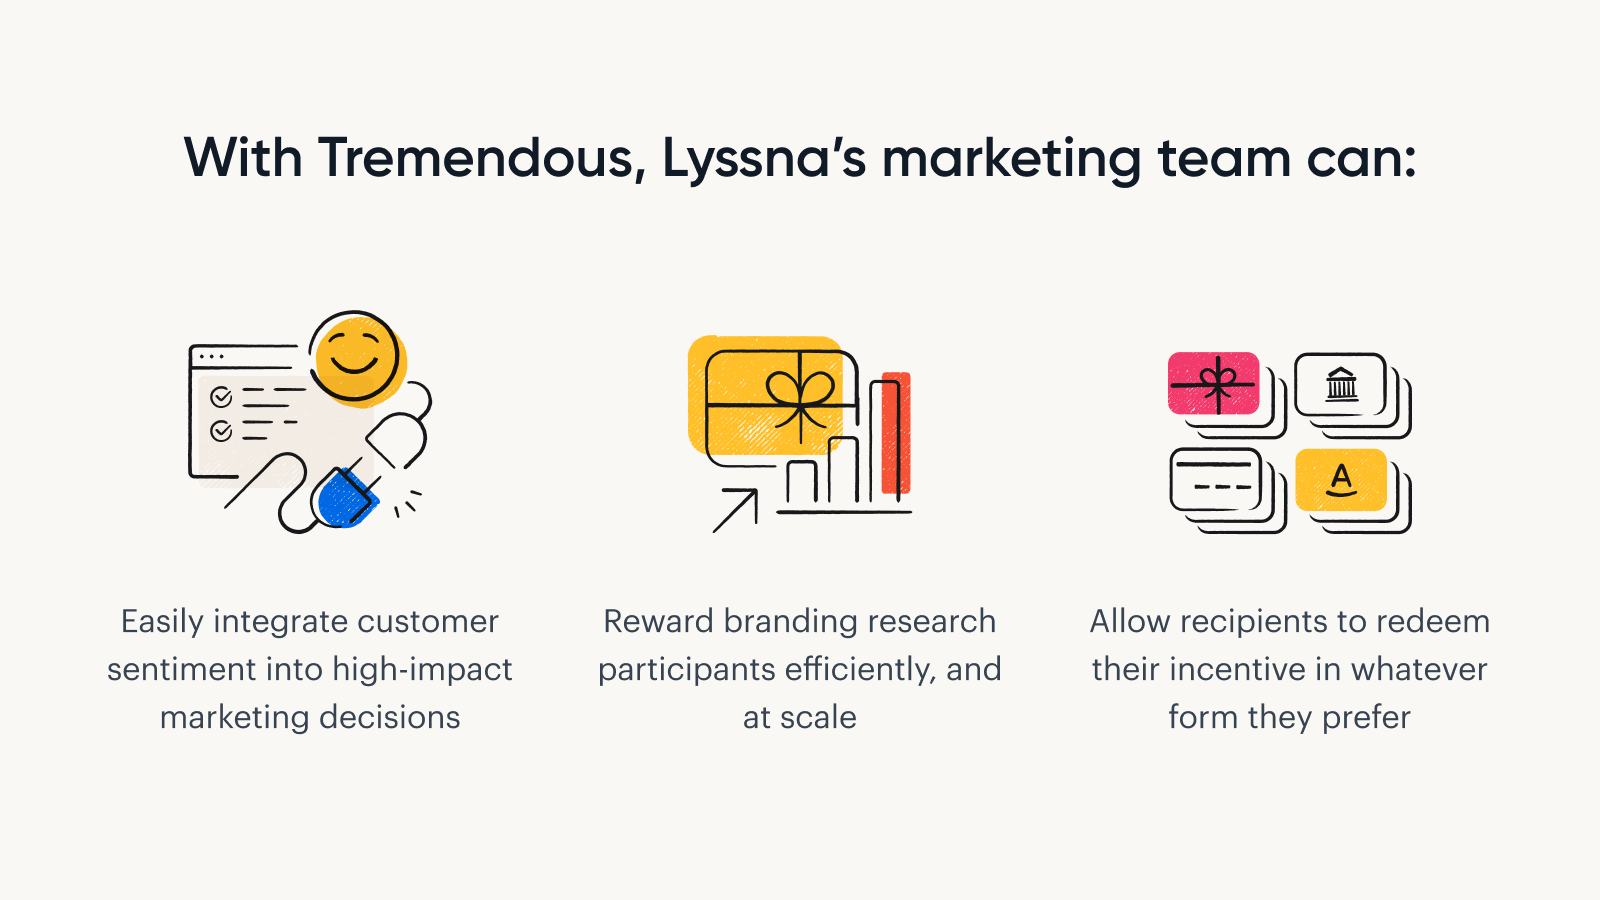 With Tremendous, Lyssna's marketing team can easily integrate customer sentiment into its decision-making processes, incentivize research participants at scale, and allow recipients to redeem incentives however they want.